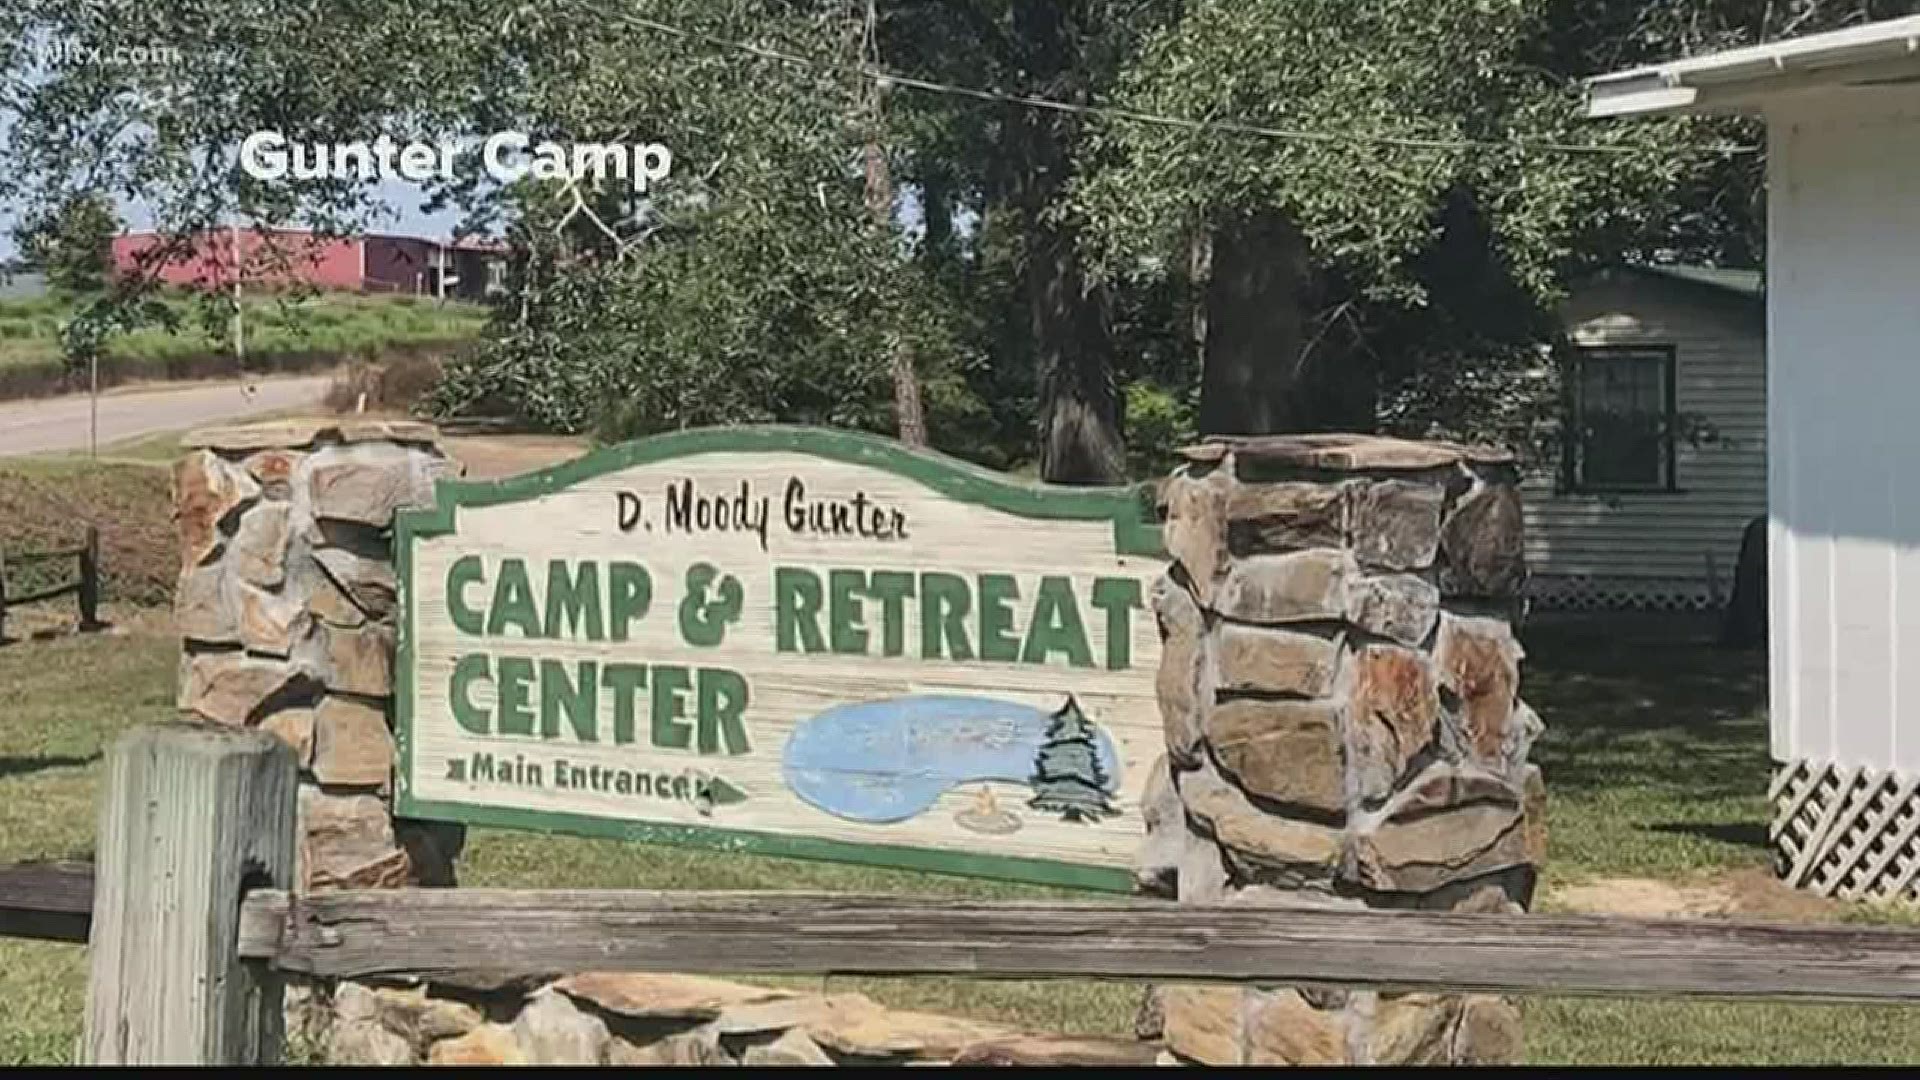 The camp in Batesburg Leesville will be renting out to anyone and with the drive in movie theather nearby is a vacation in your backyard.